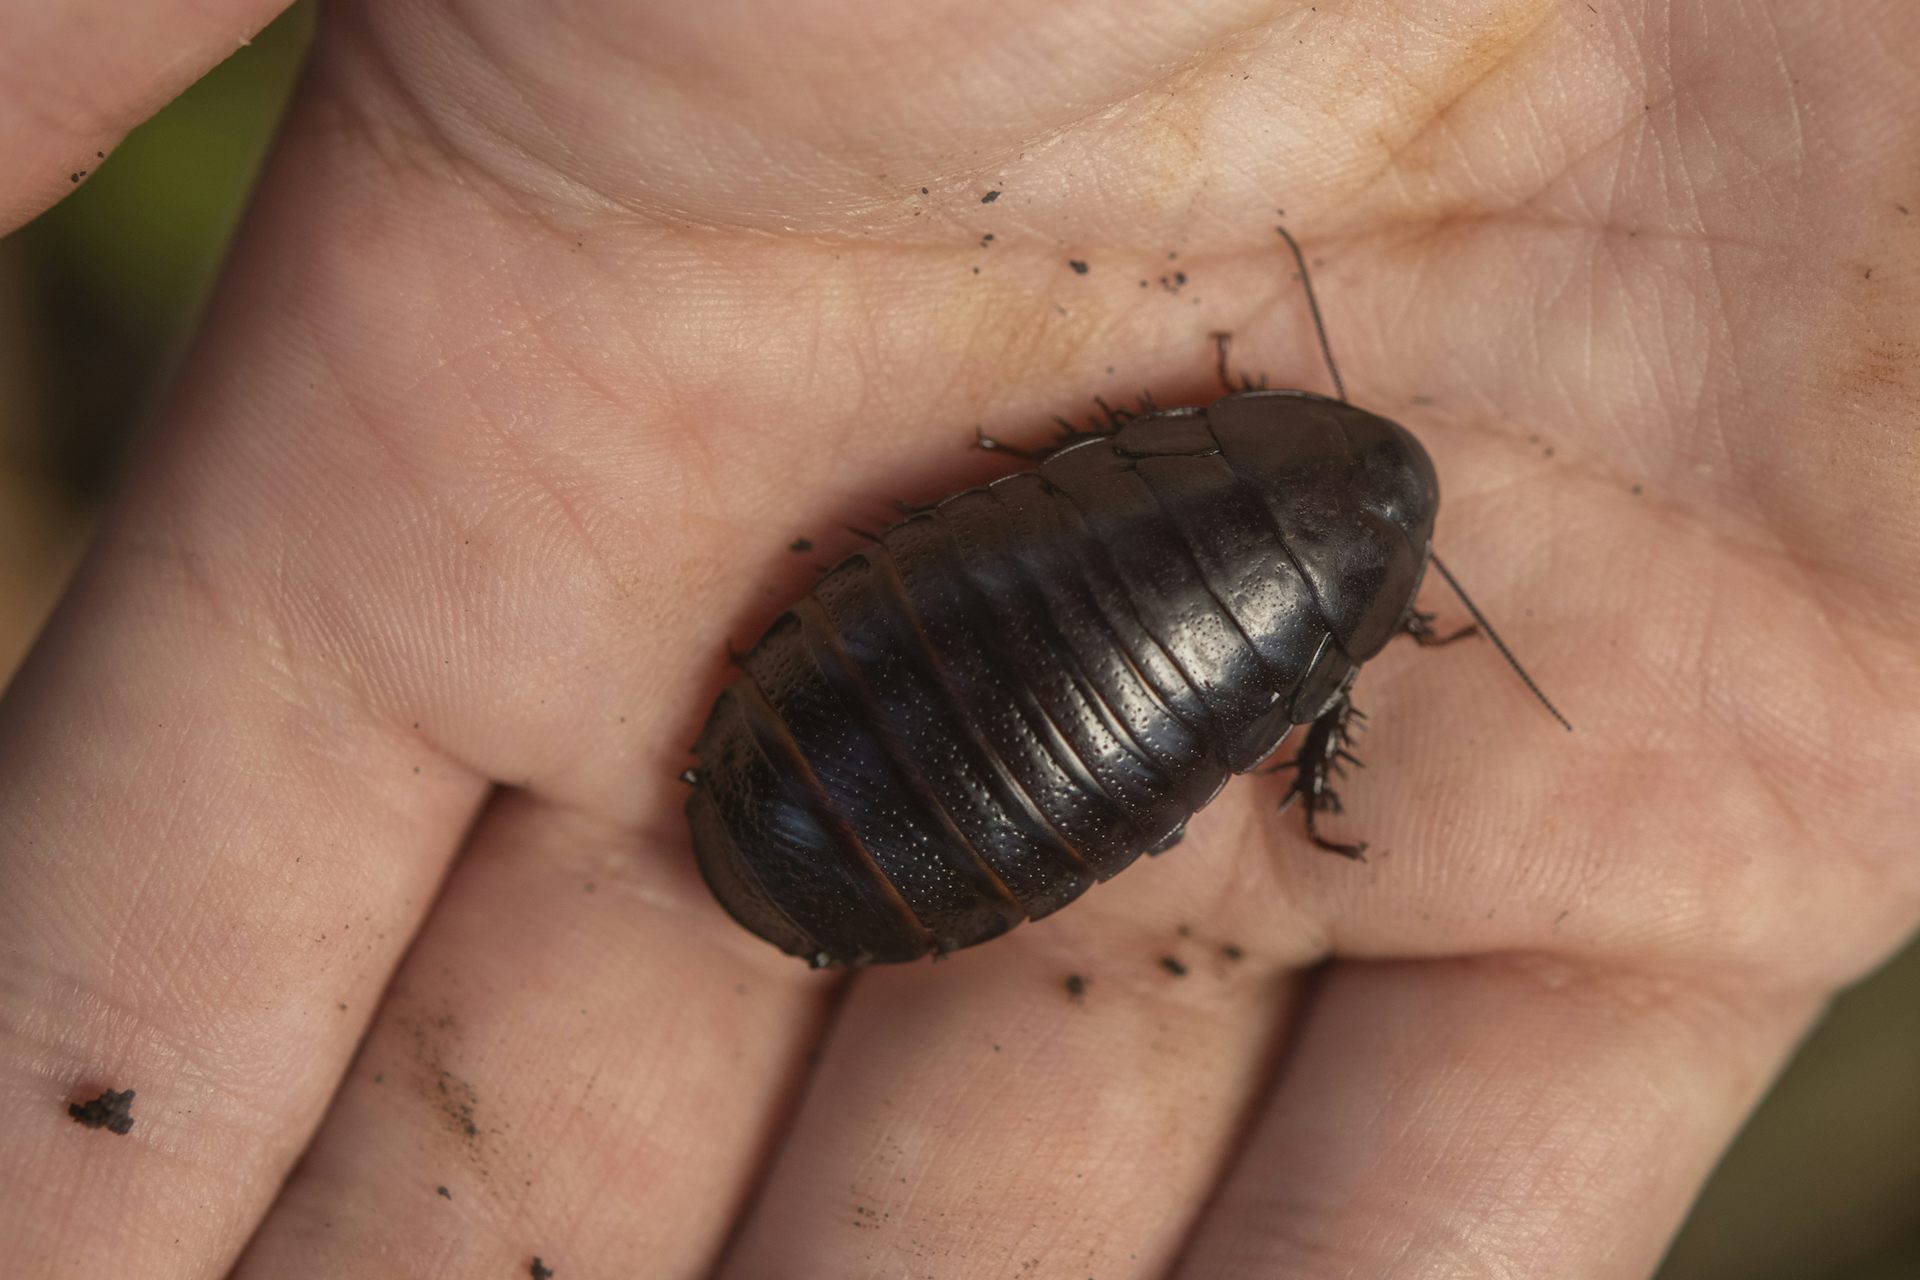 A large cockroach thought extinct since the 1930s was just